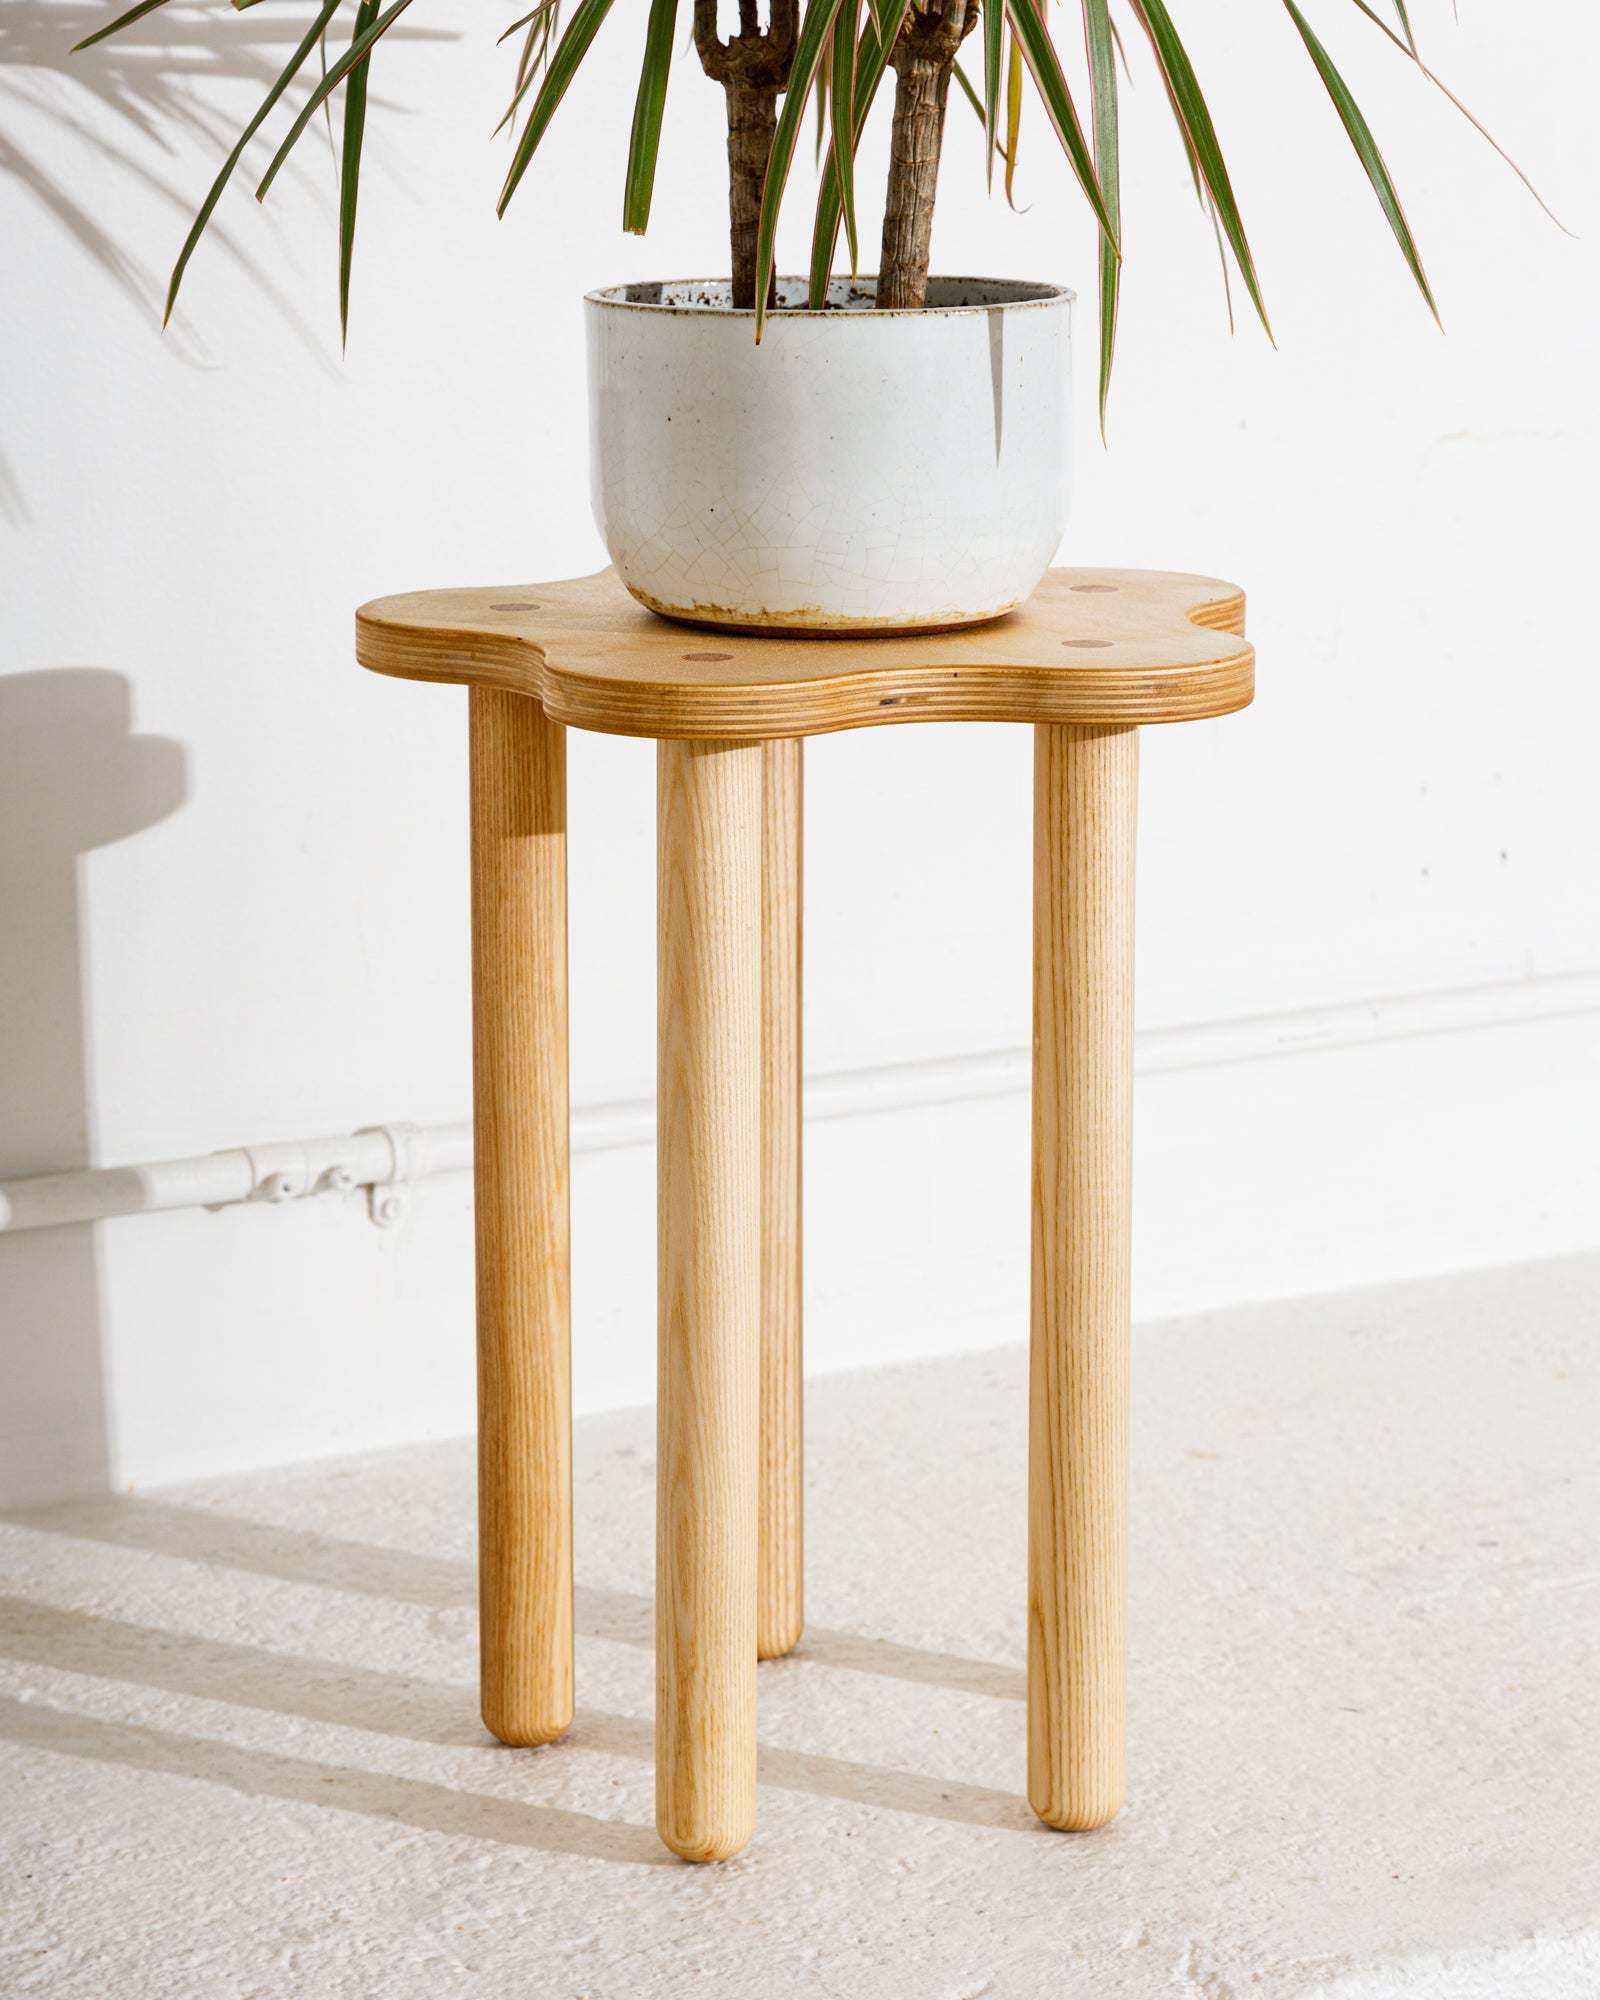 Plant Stand - Tall Star